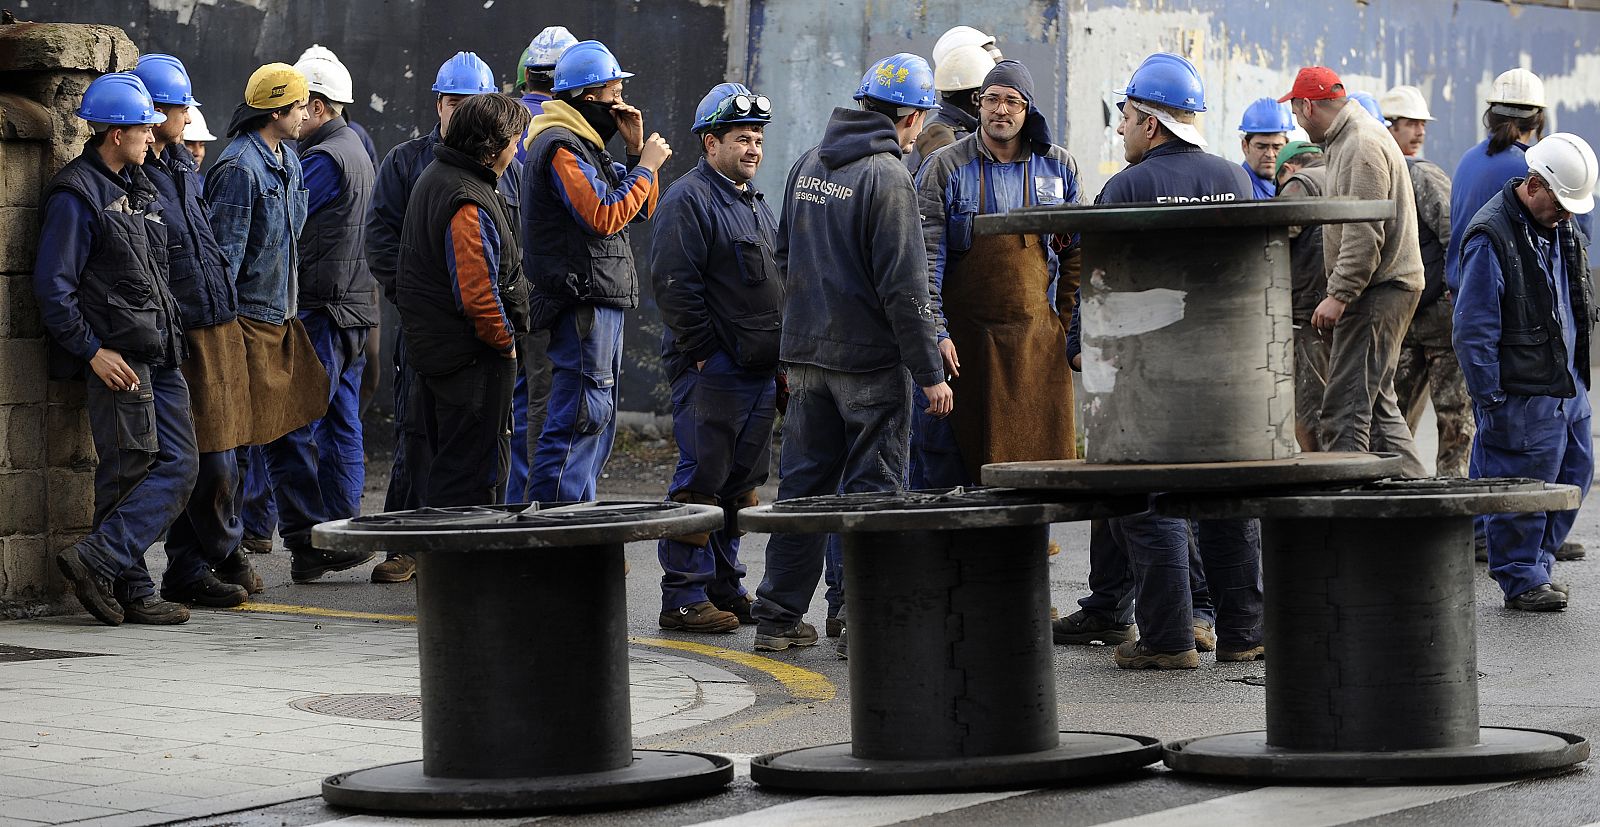 Shipyard workers roll a barricade during a protest in Gijon, northern Spain